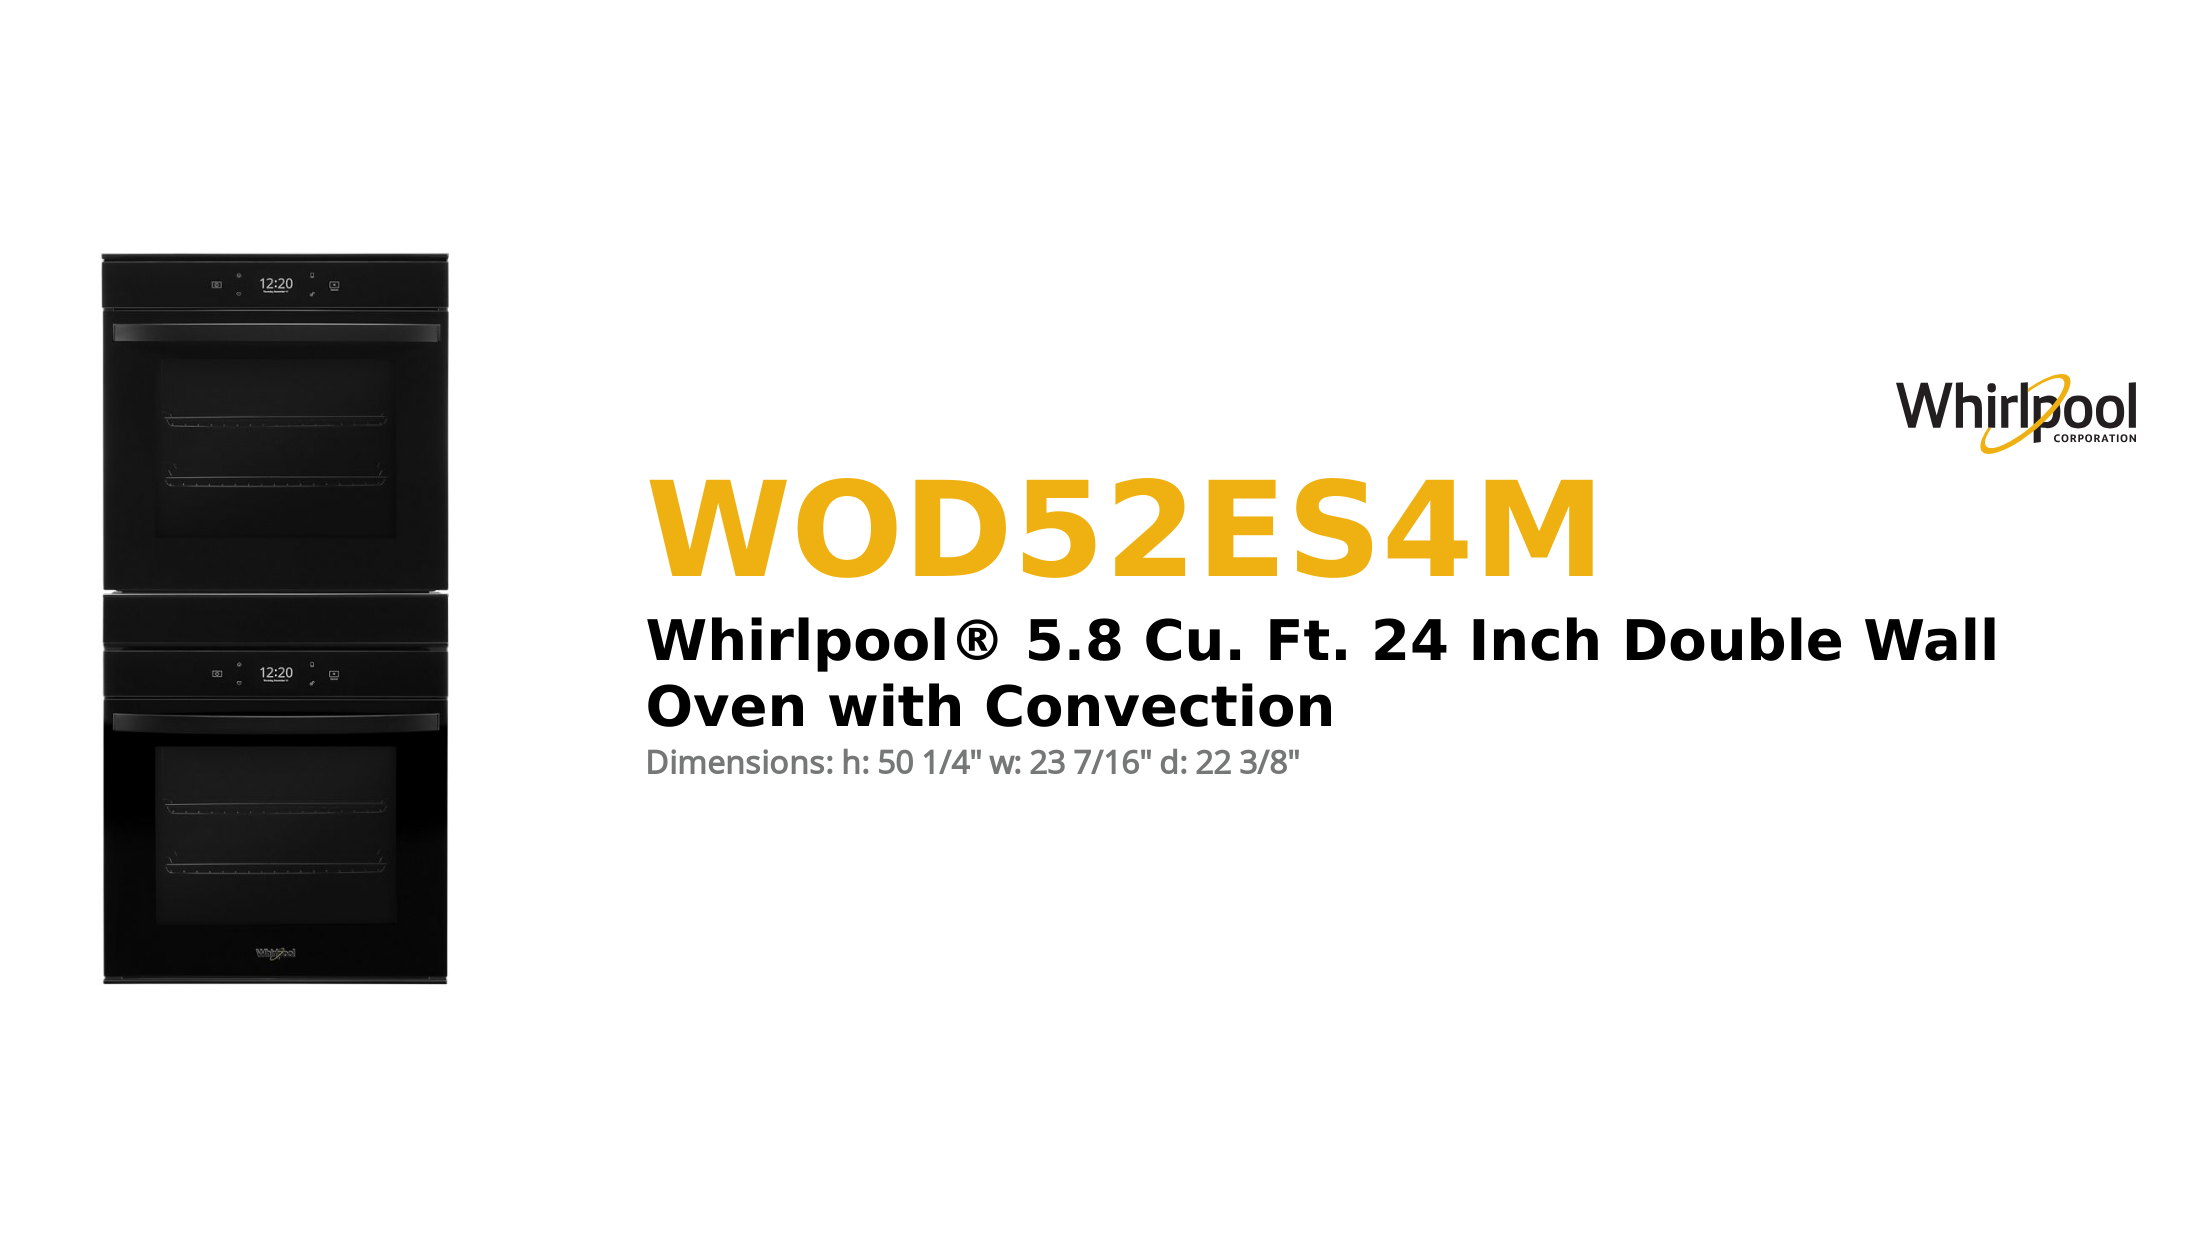 Whirlpool® 5.8 Cu. Ft. 24 Inch Double Wall Oven with Convection
 